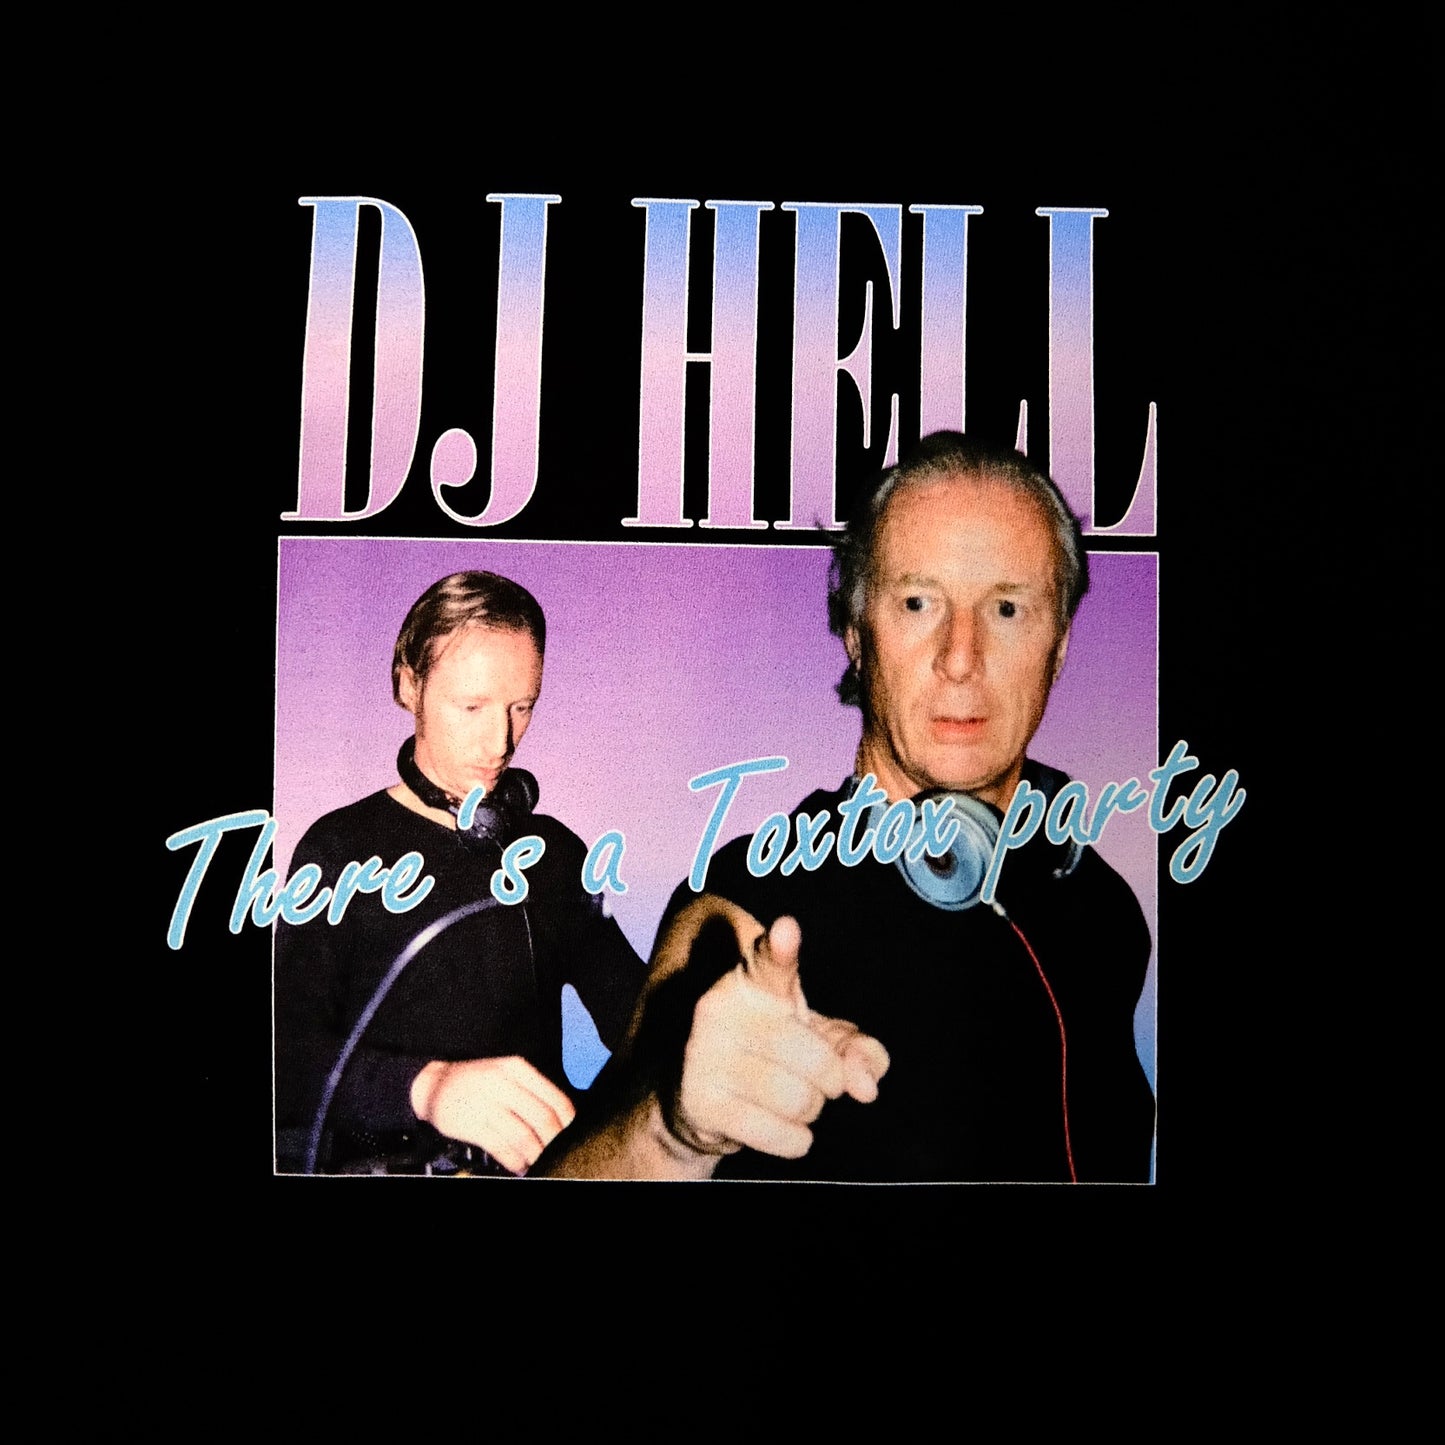 DJ Hell - There is a Toxtox party